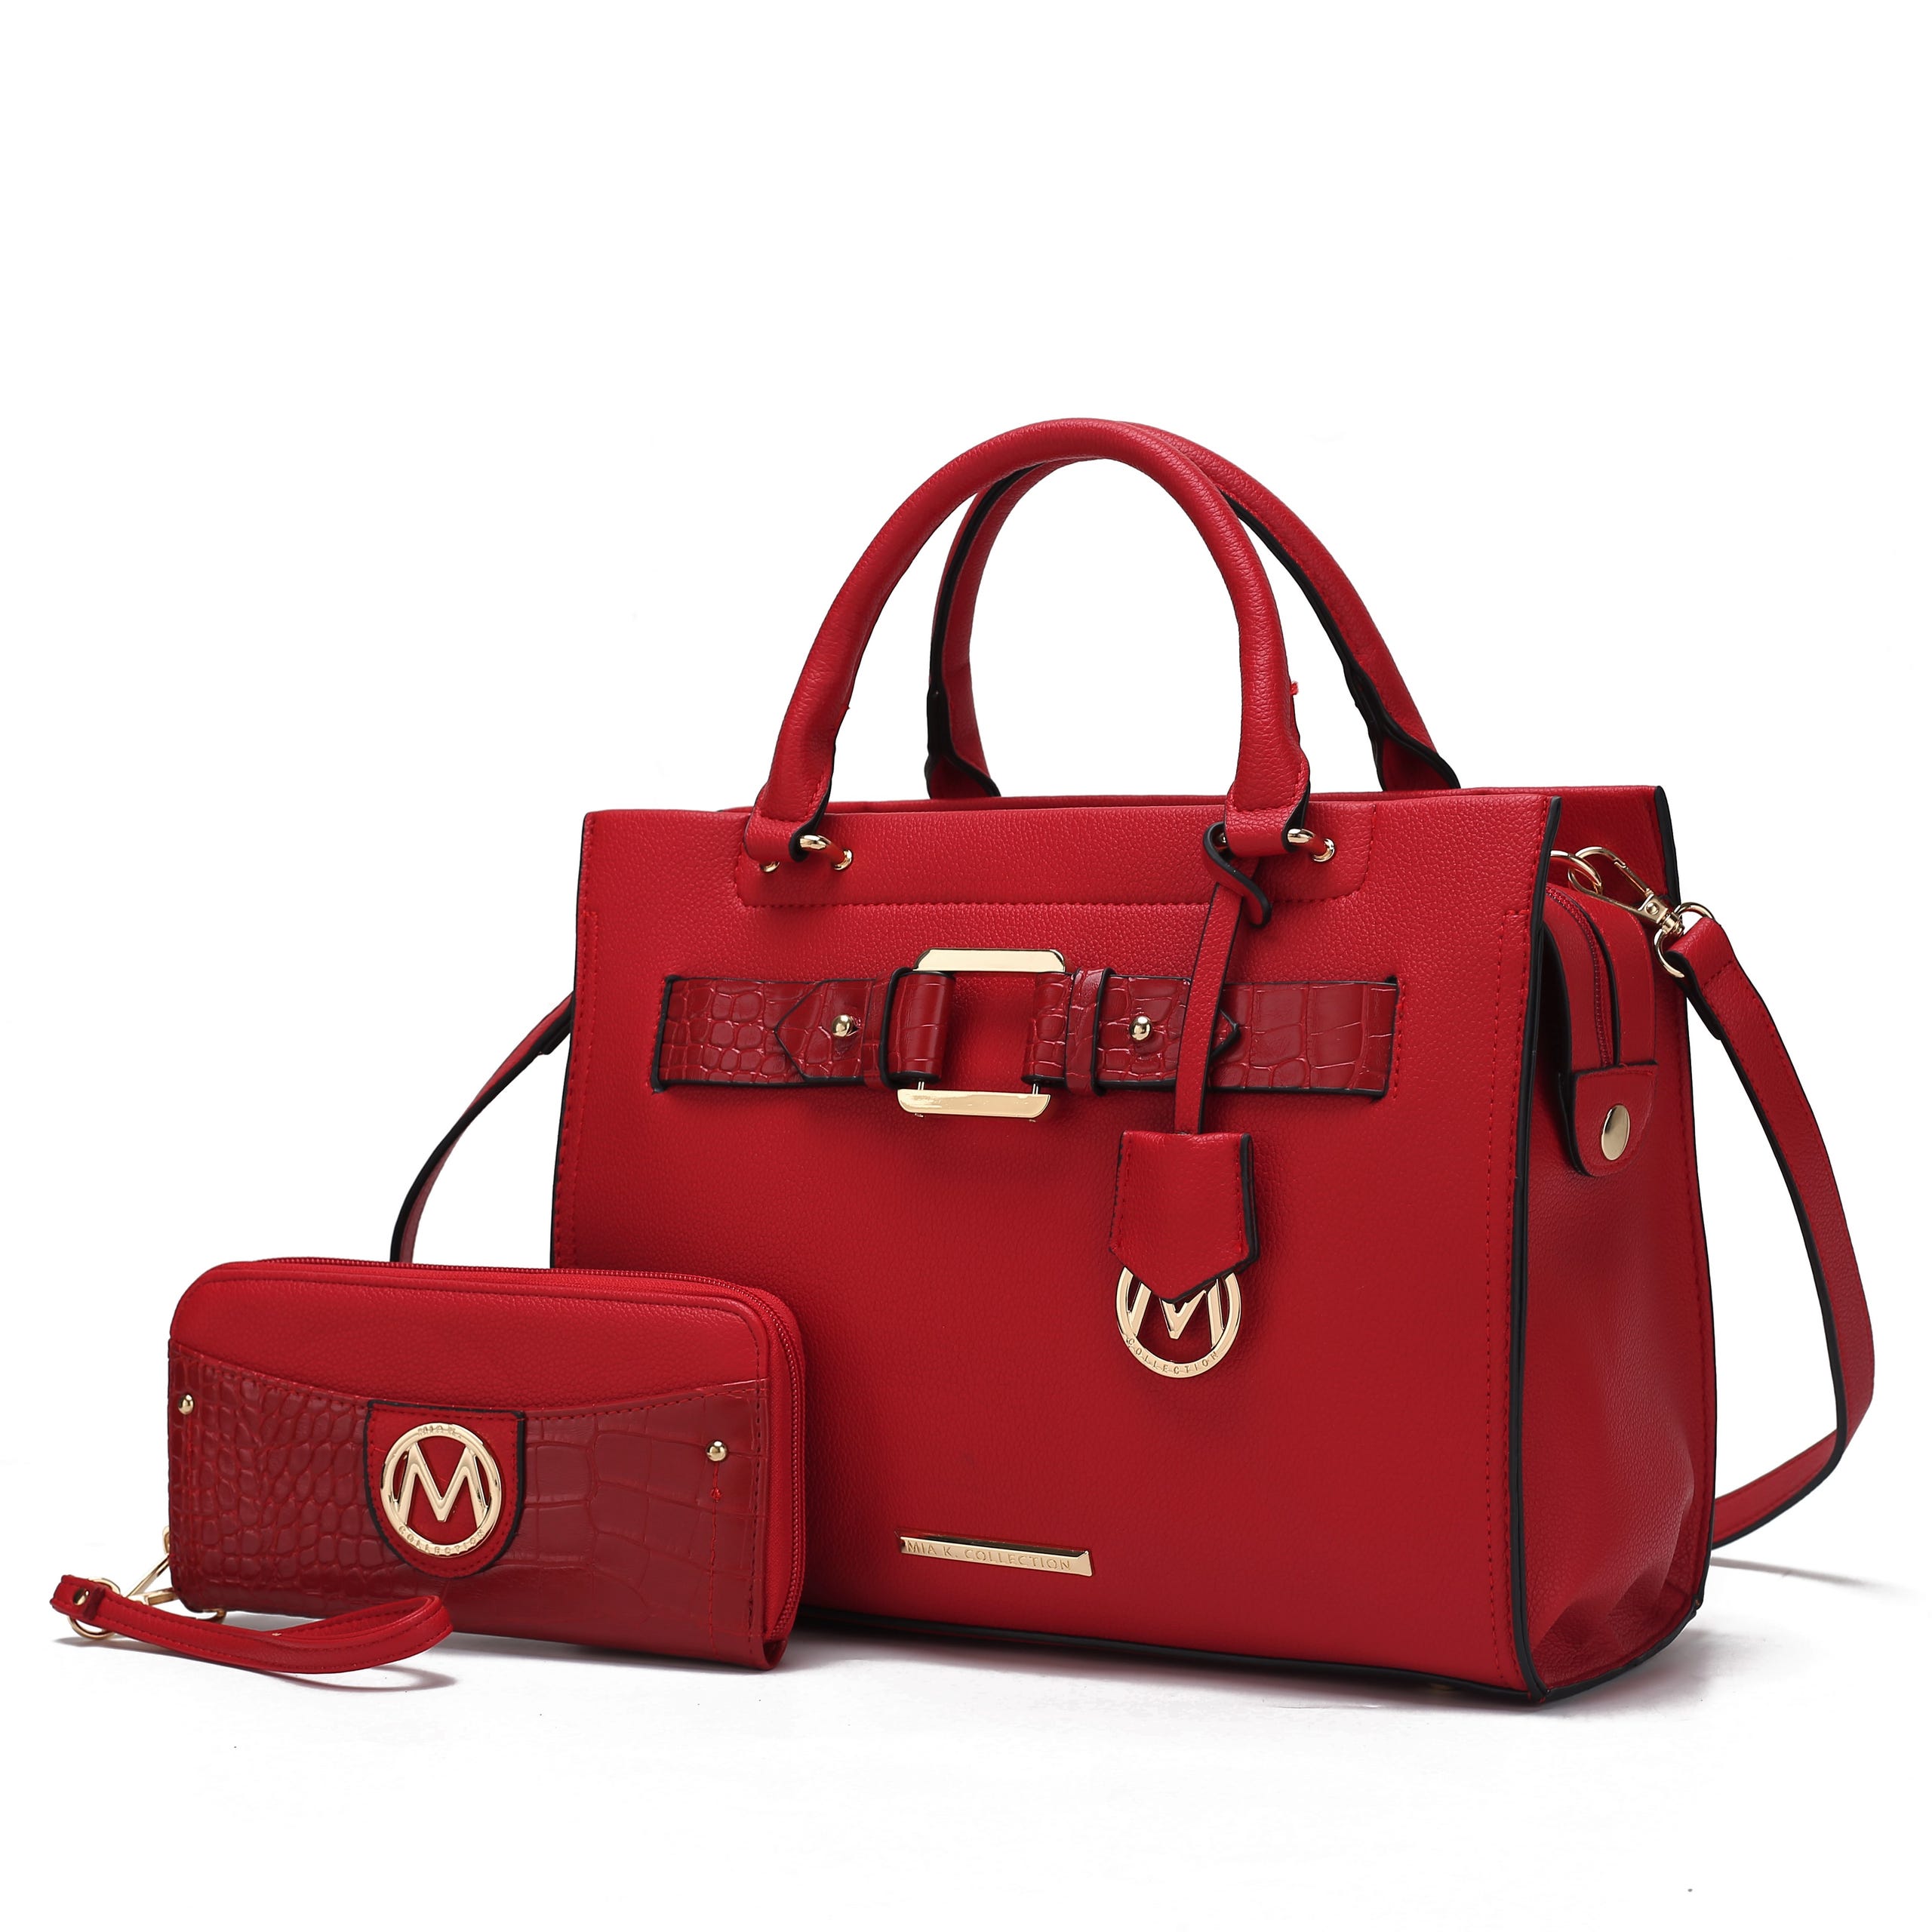 A red handbag with a textured belt buckle design and a matching red wallet with a wrist strap.